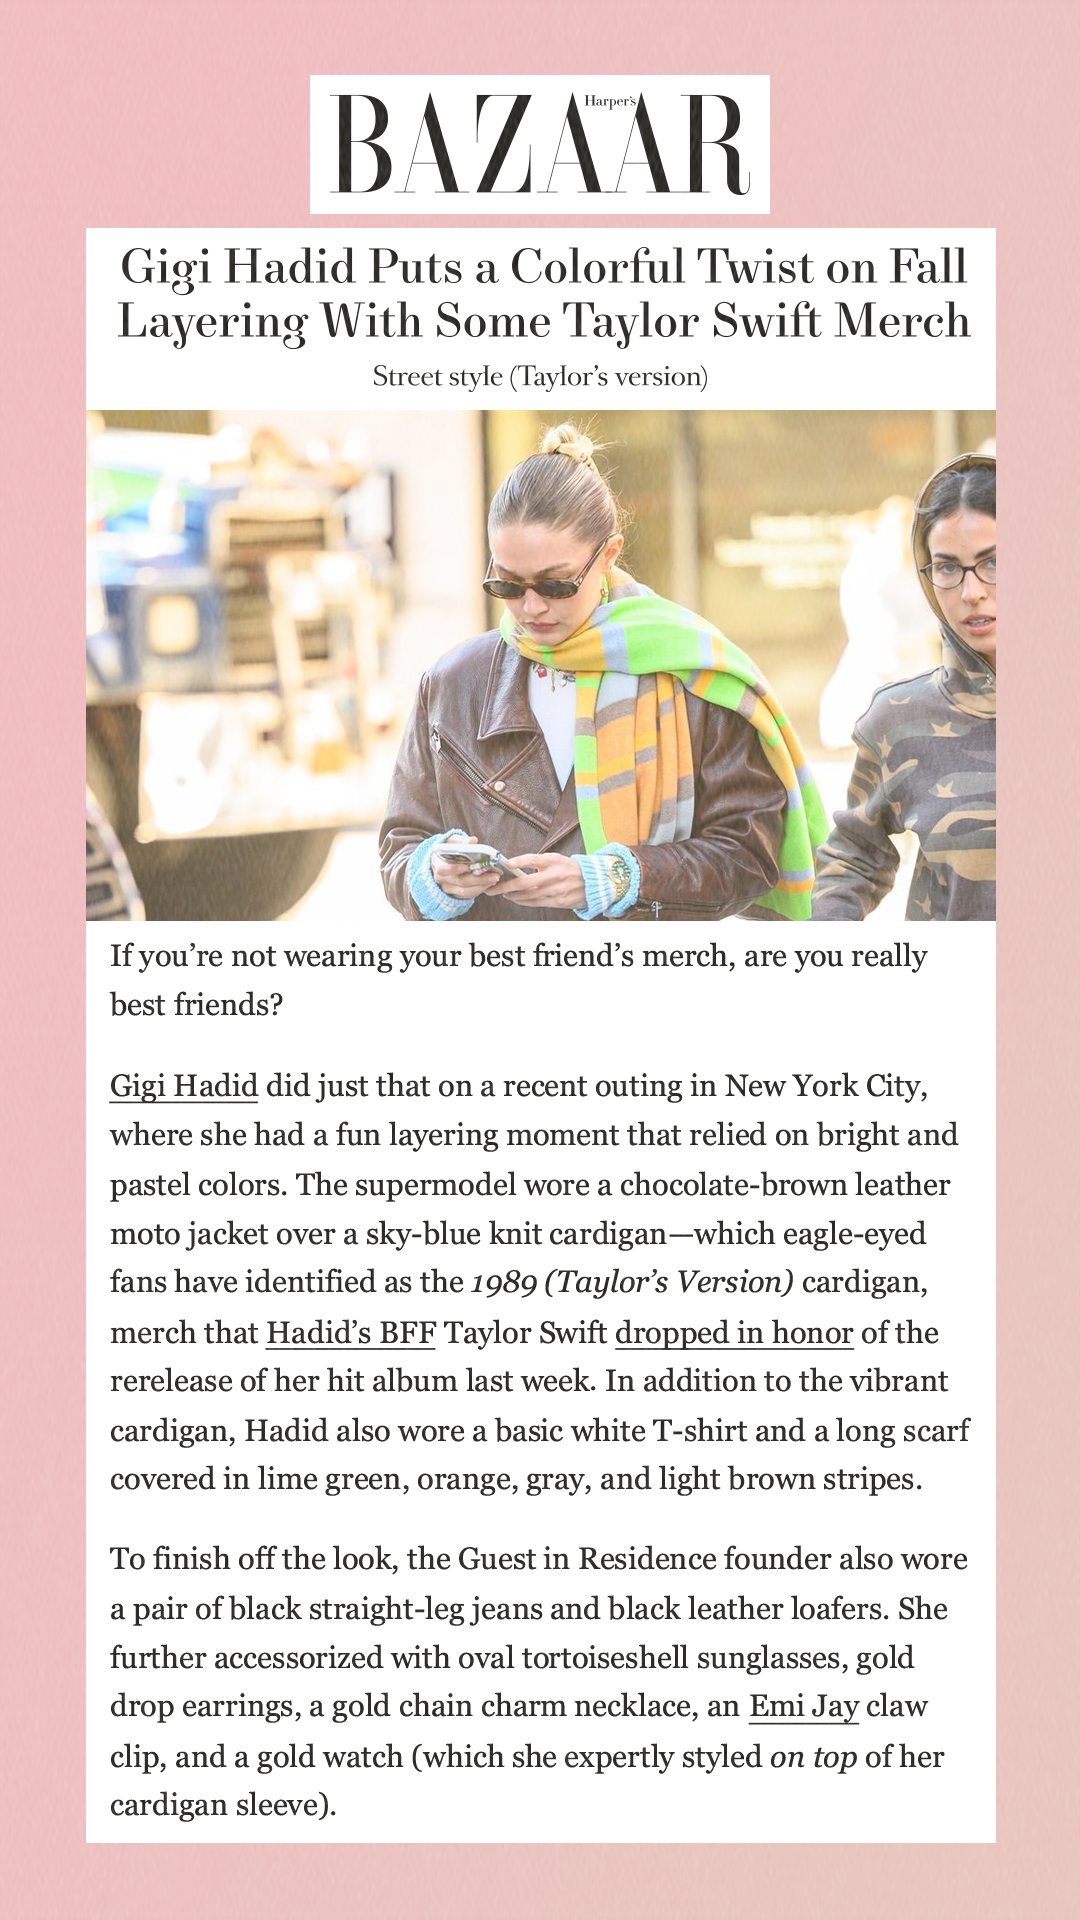 Gigi Hadid Puts a Colorful Twist on Fall Layering With Some Taylor Swift MerchStreet style (Taylor’s version) If you’re not wearing your best friend’s merch, are you really best friends?Gigi Hadid did just that on a recent outing in New York City, where she had a fun layering moment that relied on bright and pastel colors. The supermodel wore a chocolate-brown leather moto jacket over a sky-blue knit cardigan—which eagle-eyed fans have identified as the 1989 (Taylor’s Version) cardigan, merch that Hadid’s BFF Taylor Swift dropped in honor of the rerelease of her hit album last week. In addition to the vibrant cardigan, Hadid also wore a basic white T-shirt and a long scarf covered in lime green, orange, gray, and light brown stripes.To finish off the look, the Guest in Residence founder also wore a pair of black straight-leg jeans and black leather loafers. She further accessorized with oval tortoiseshell sunglasses, gold drop earrings, a gold chain charm necklace, an Emi Jay claw clip, and a gold watch (which she expertly styled on top of her cardigan sleeve).